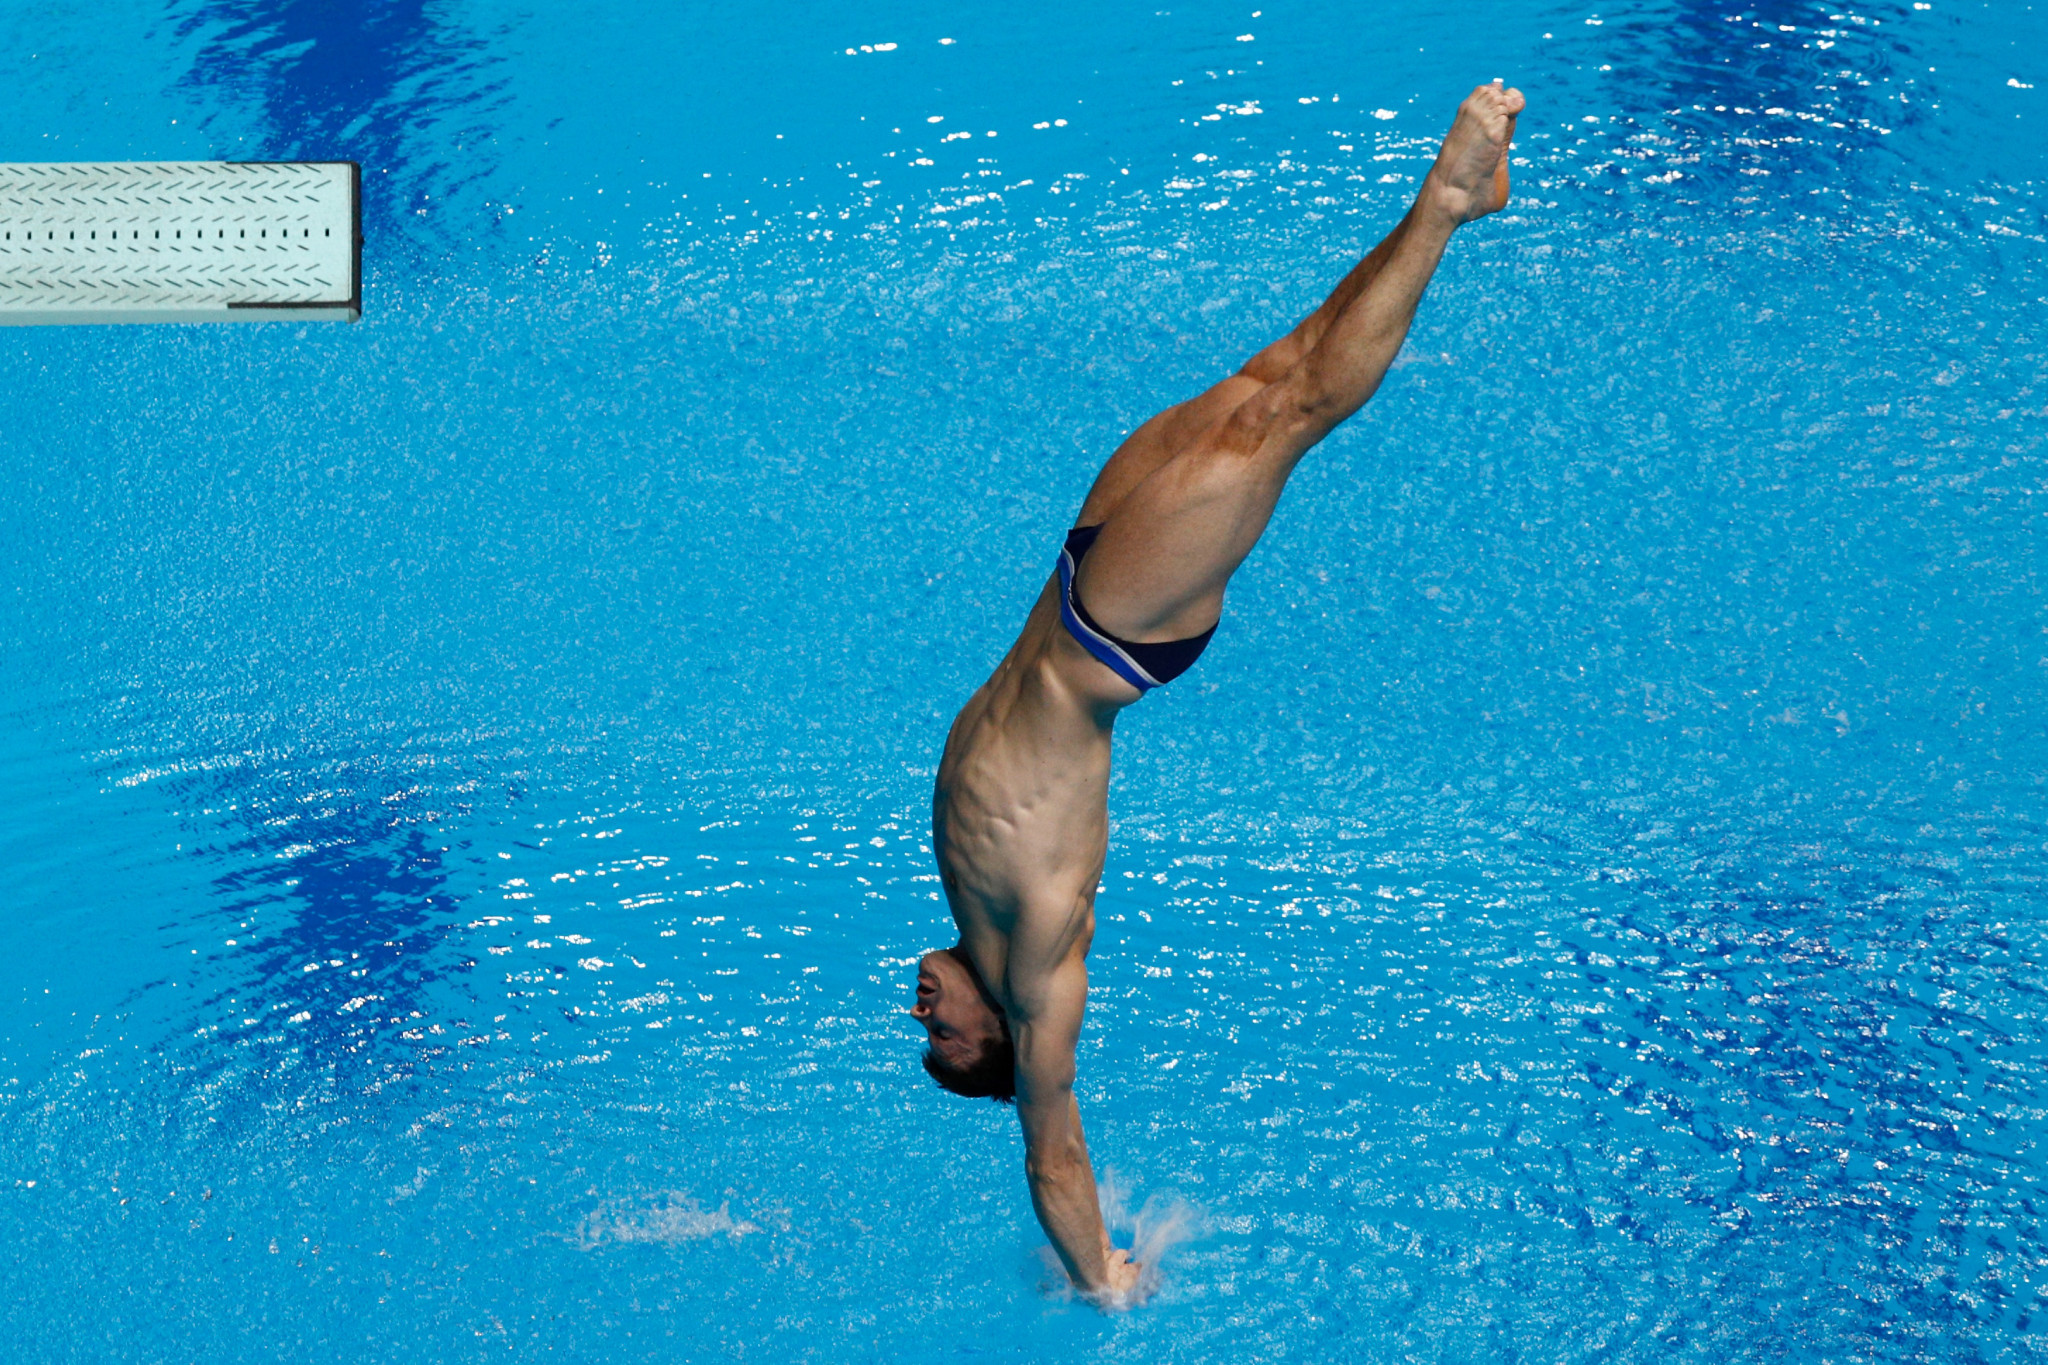 Hausding clinches home gold on opening day of FINA Diving Grand Prix in Rostock